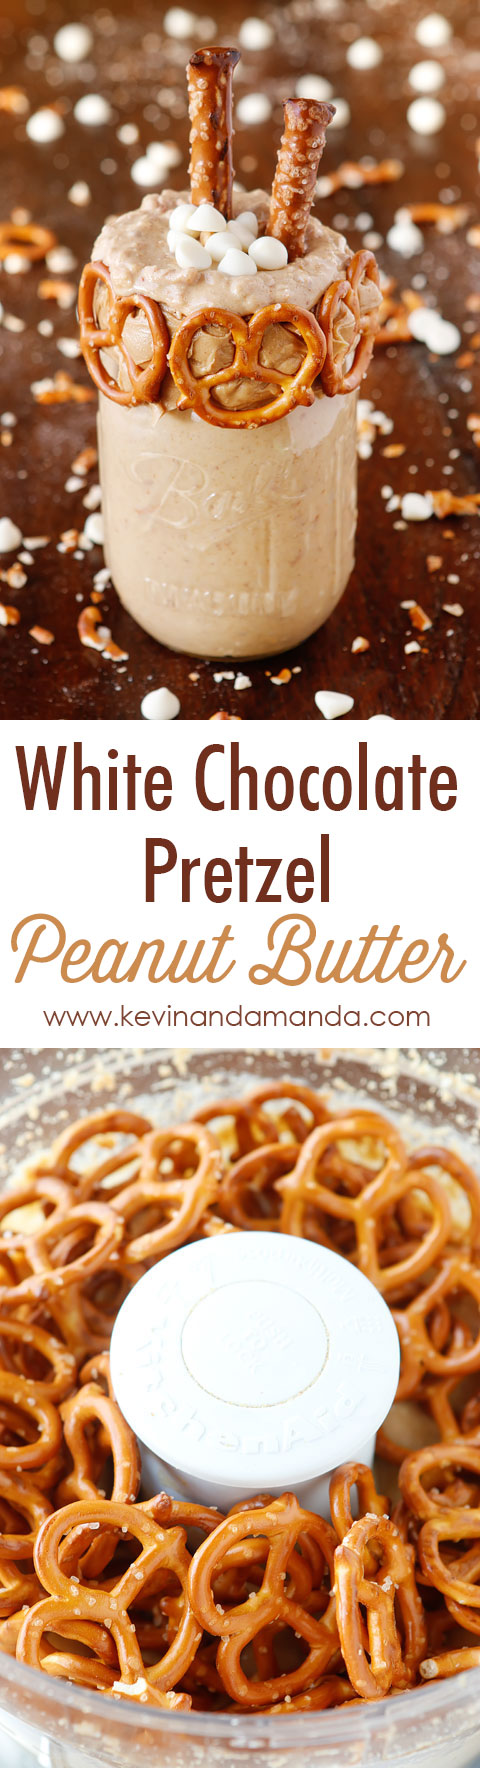 White Chocolate Pretzel Peanut Butter. This is literally the BEST thing I have EVER tasted!!!